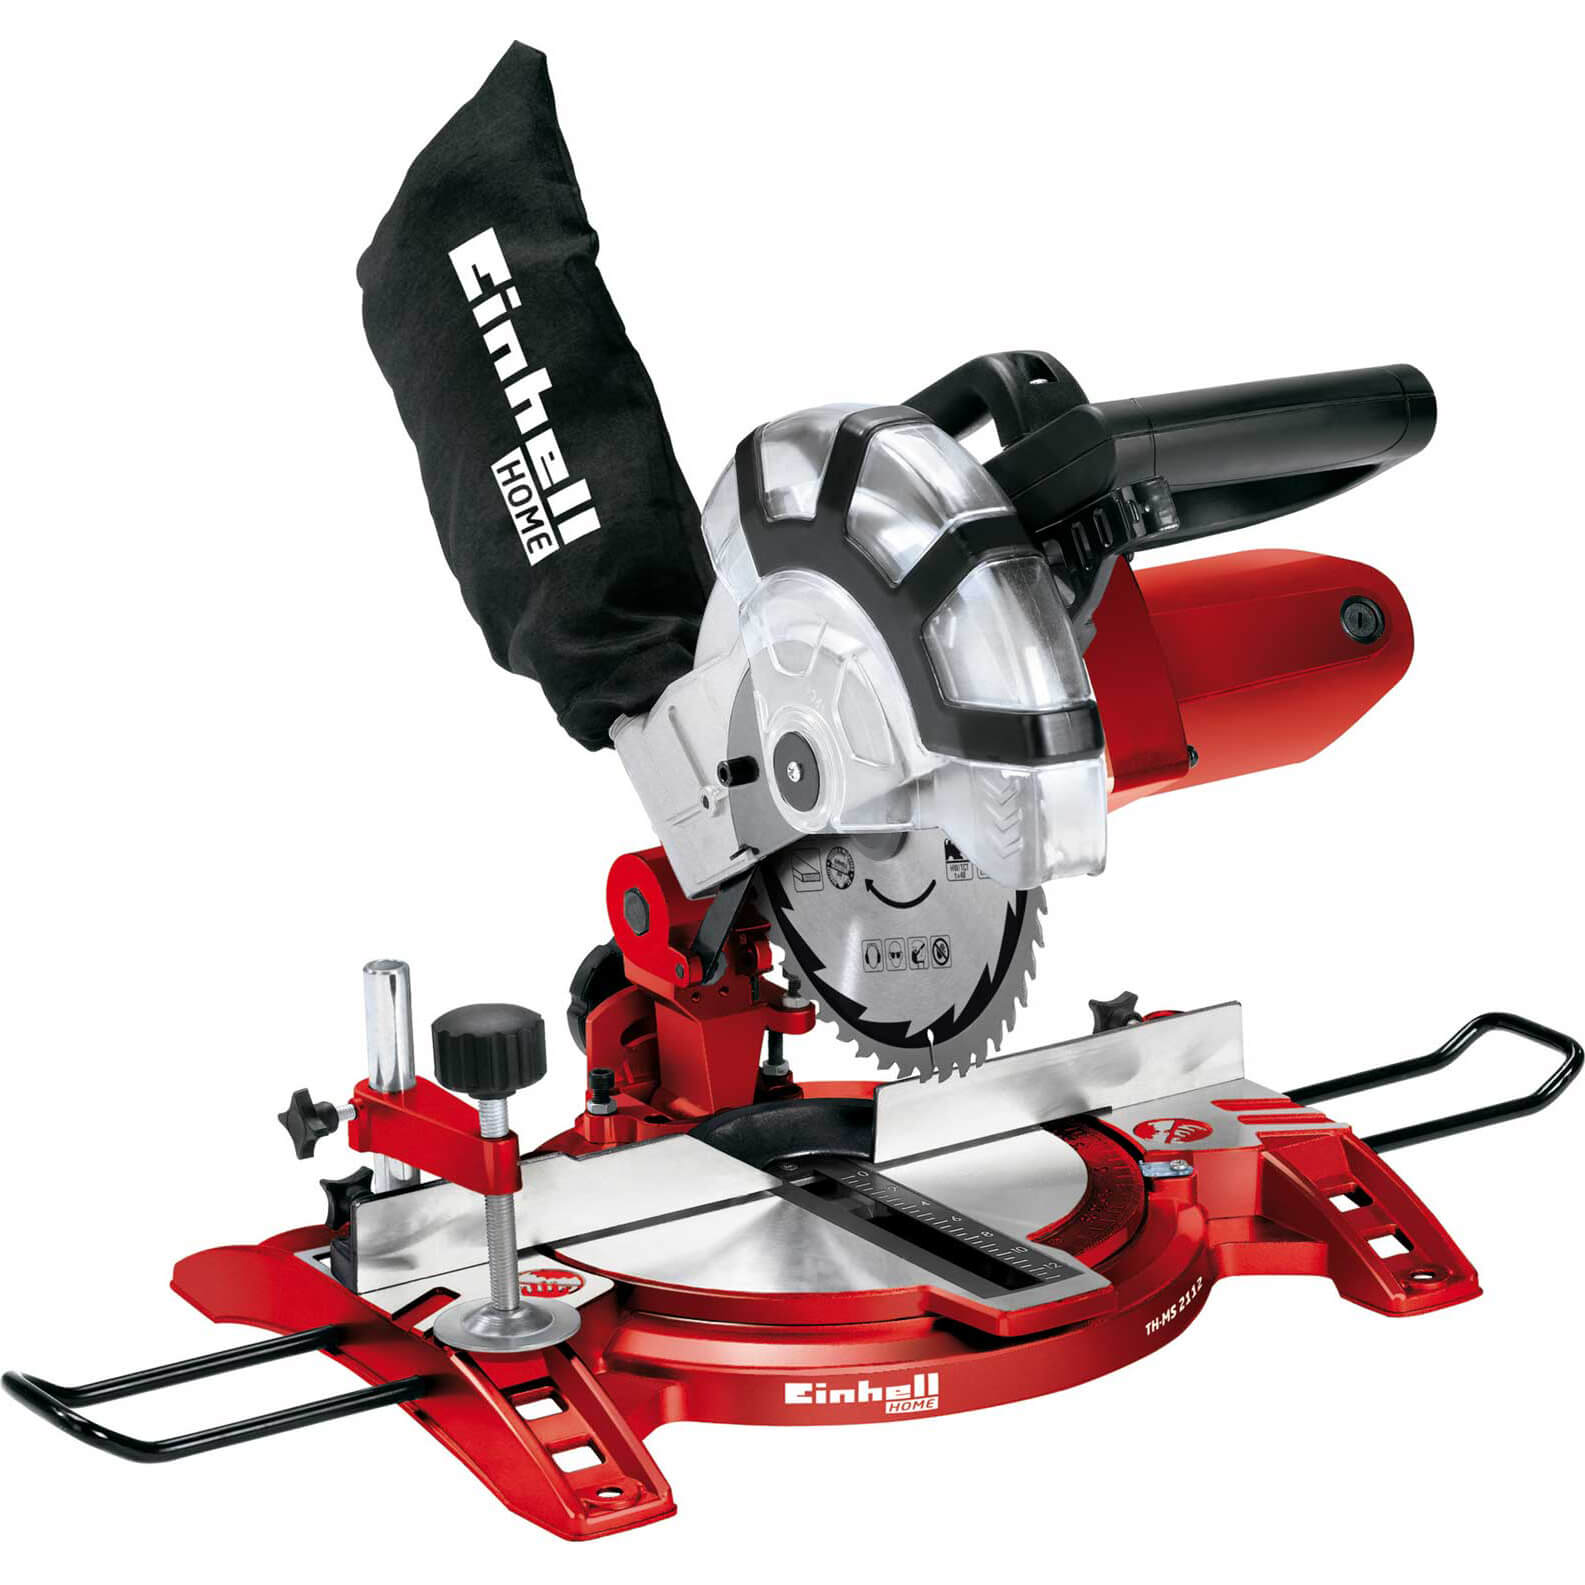 Image of Einhell TC-MS 2112 Compound Mitre Saw 210mm